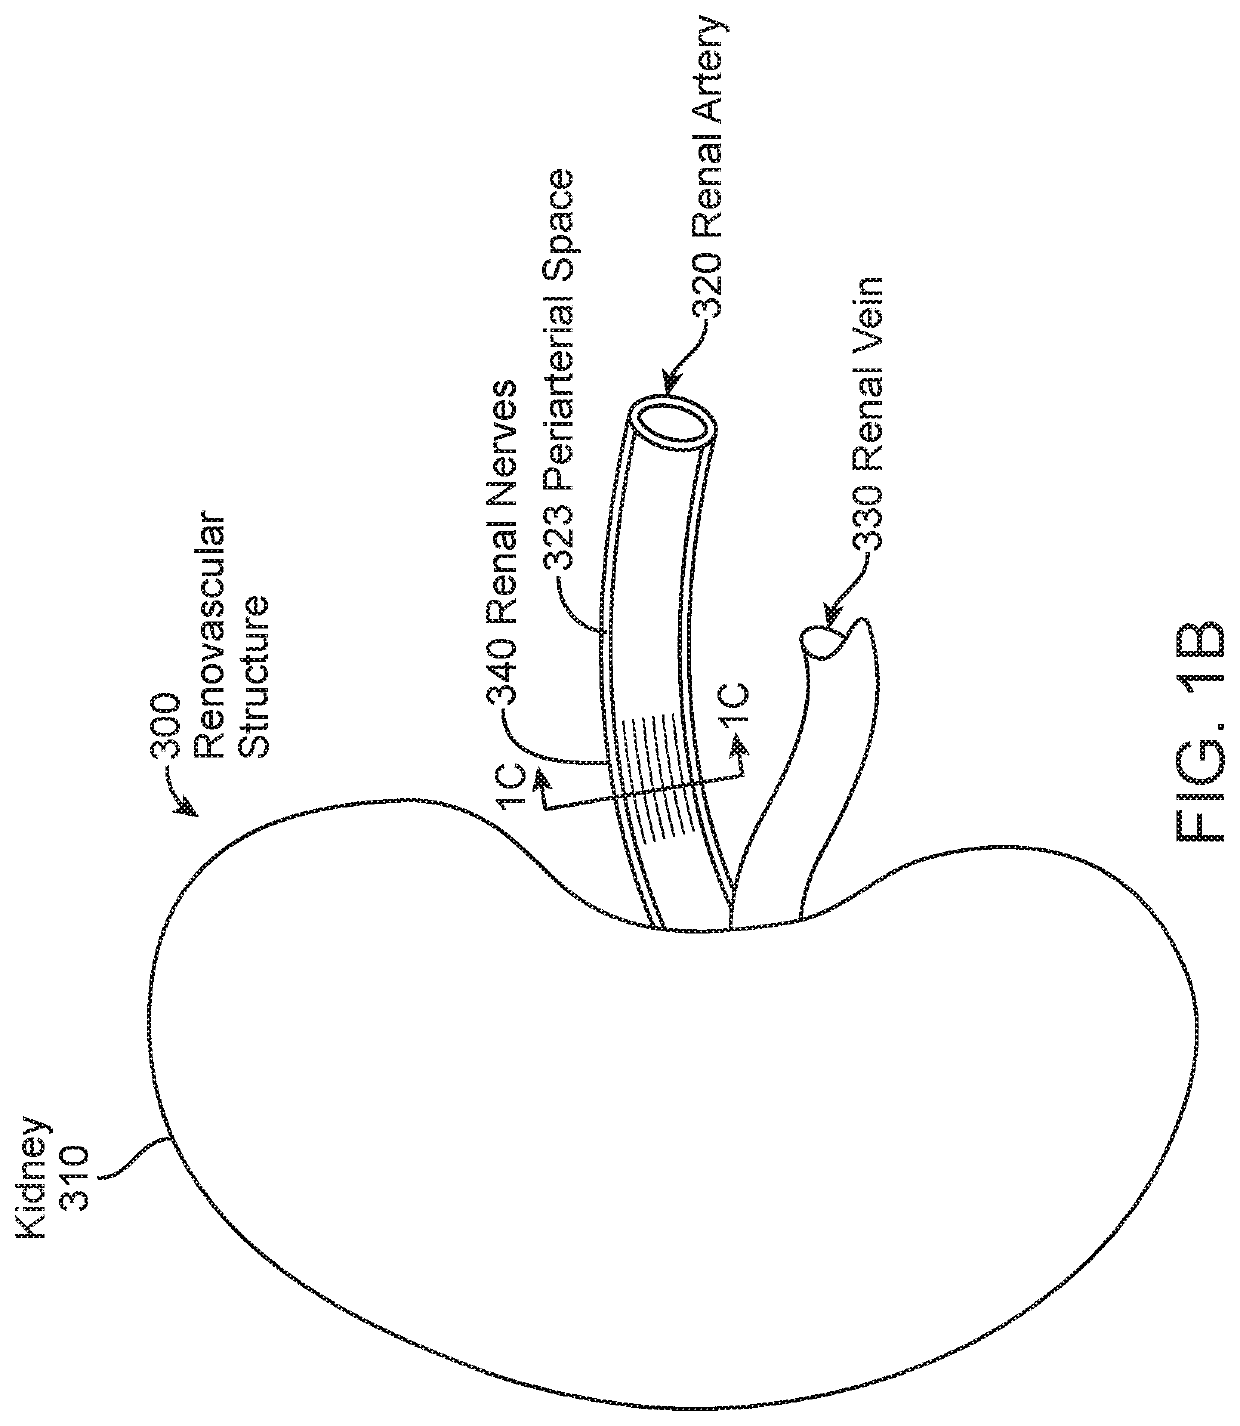 Renovascular treatment device, system, and method for radiosurgically alleviating hypertension